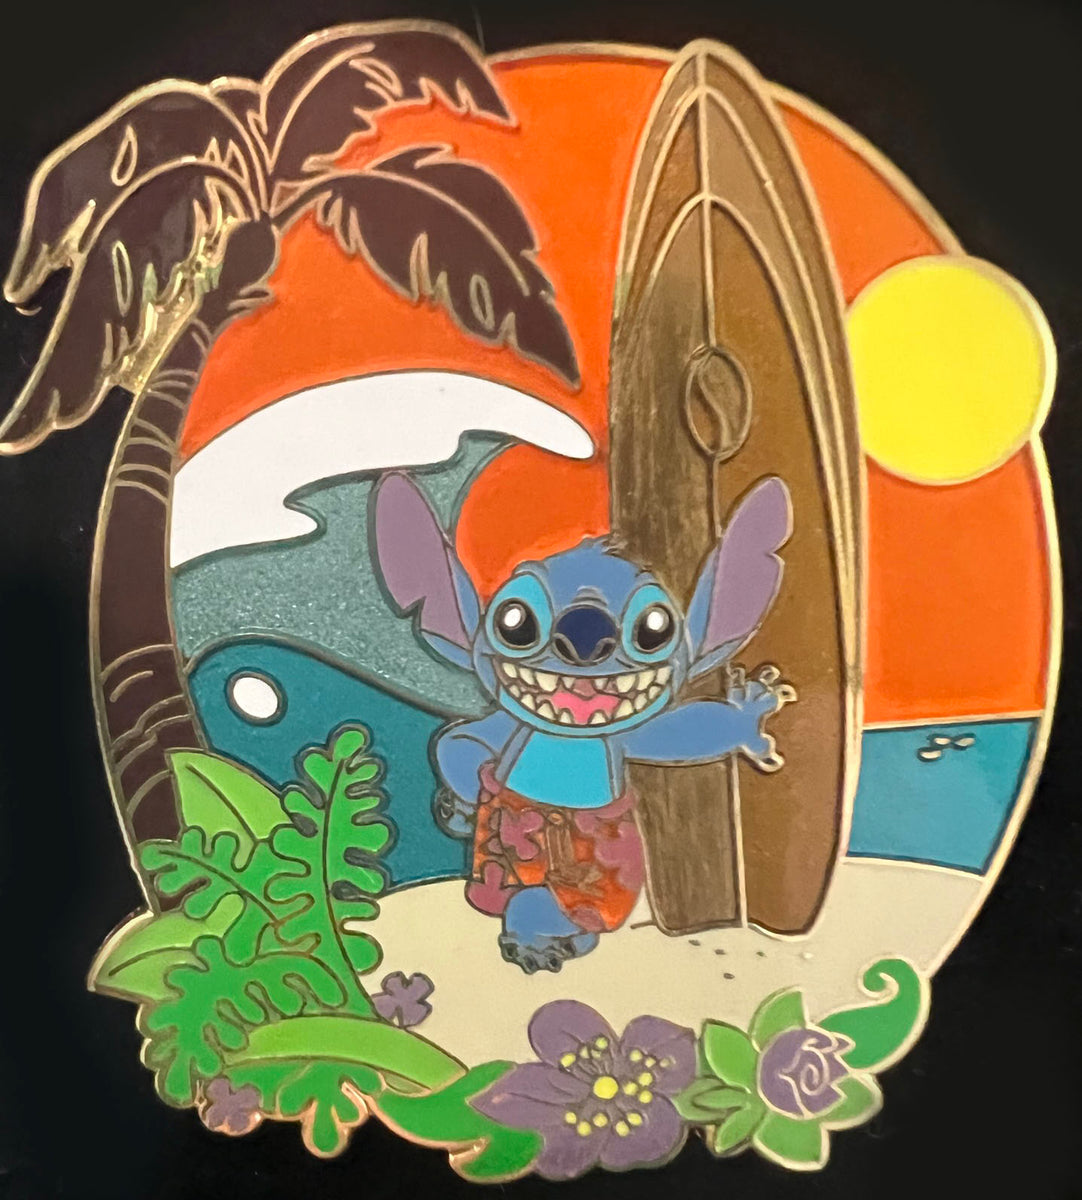 Lilo & Stitch Stained Glass Disney Pin at Hot Topic - Disney Pins Blog